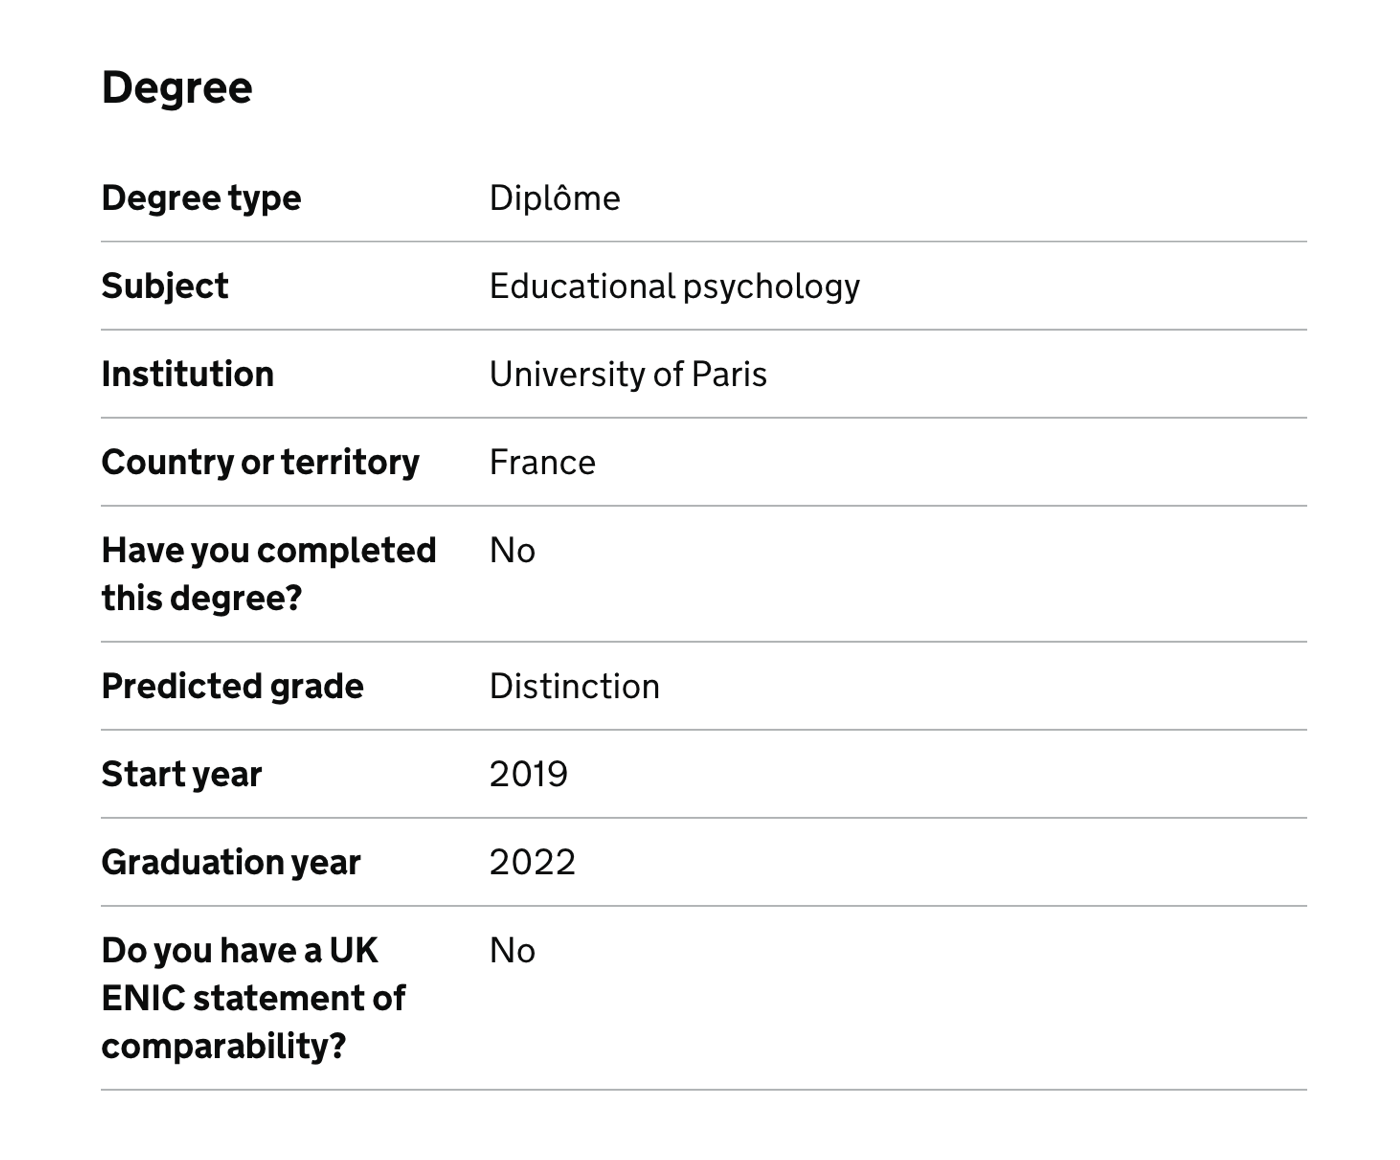 International candidate who hasn’t completed their degree